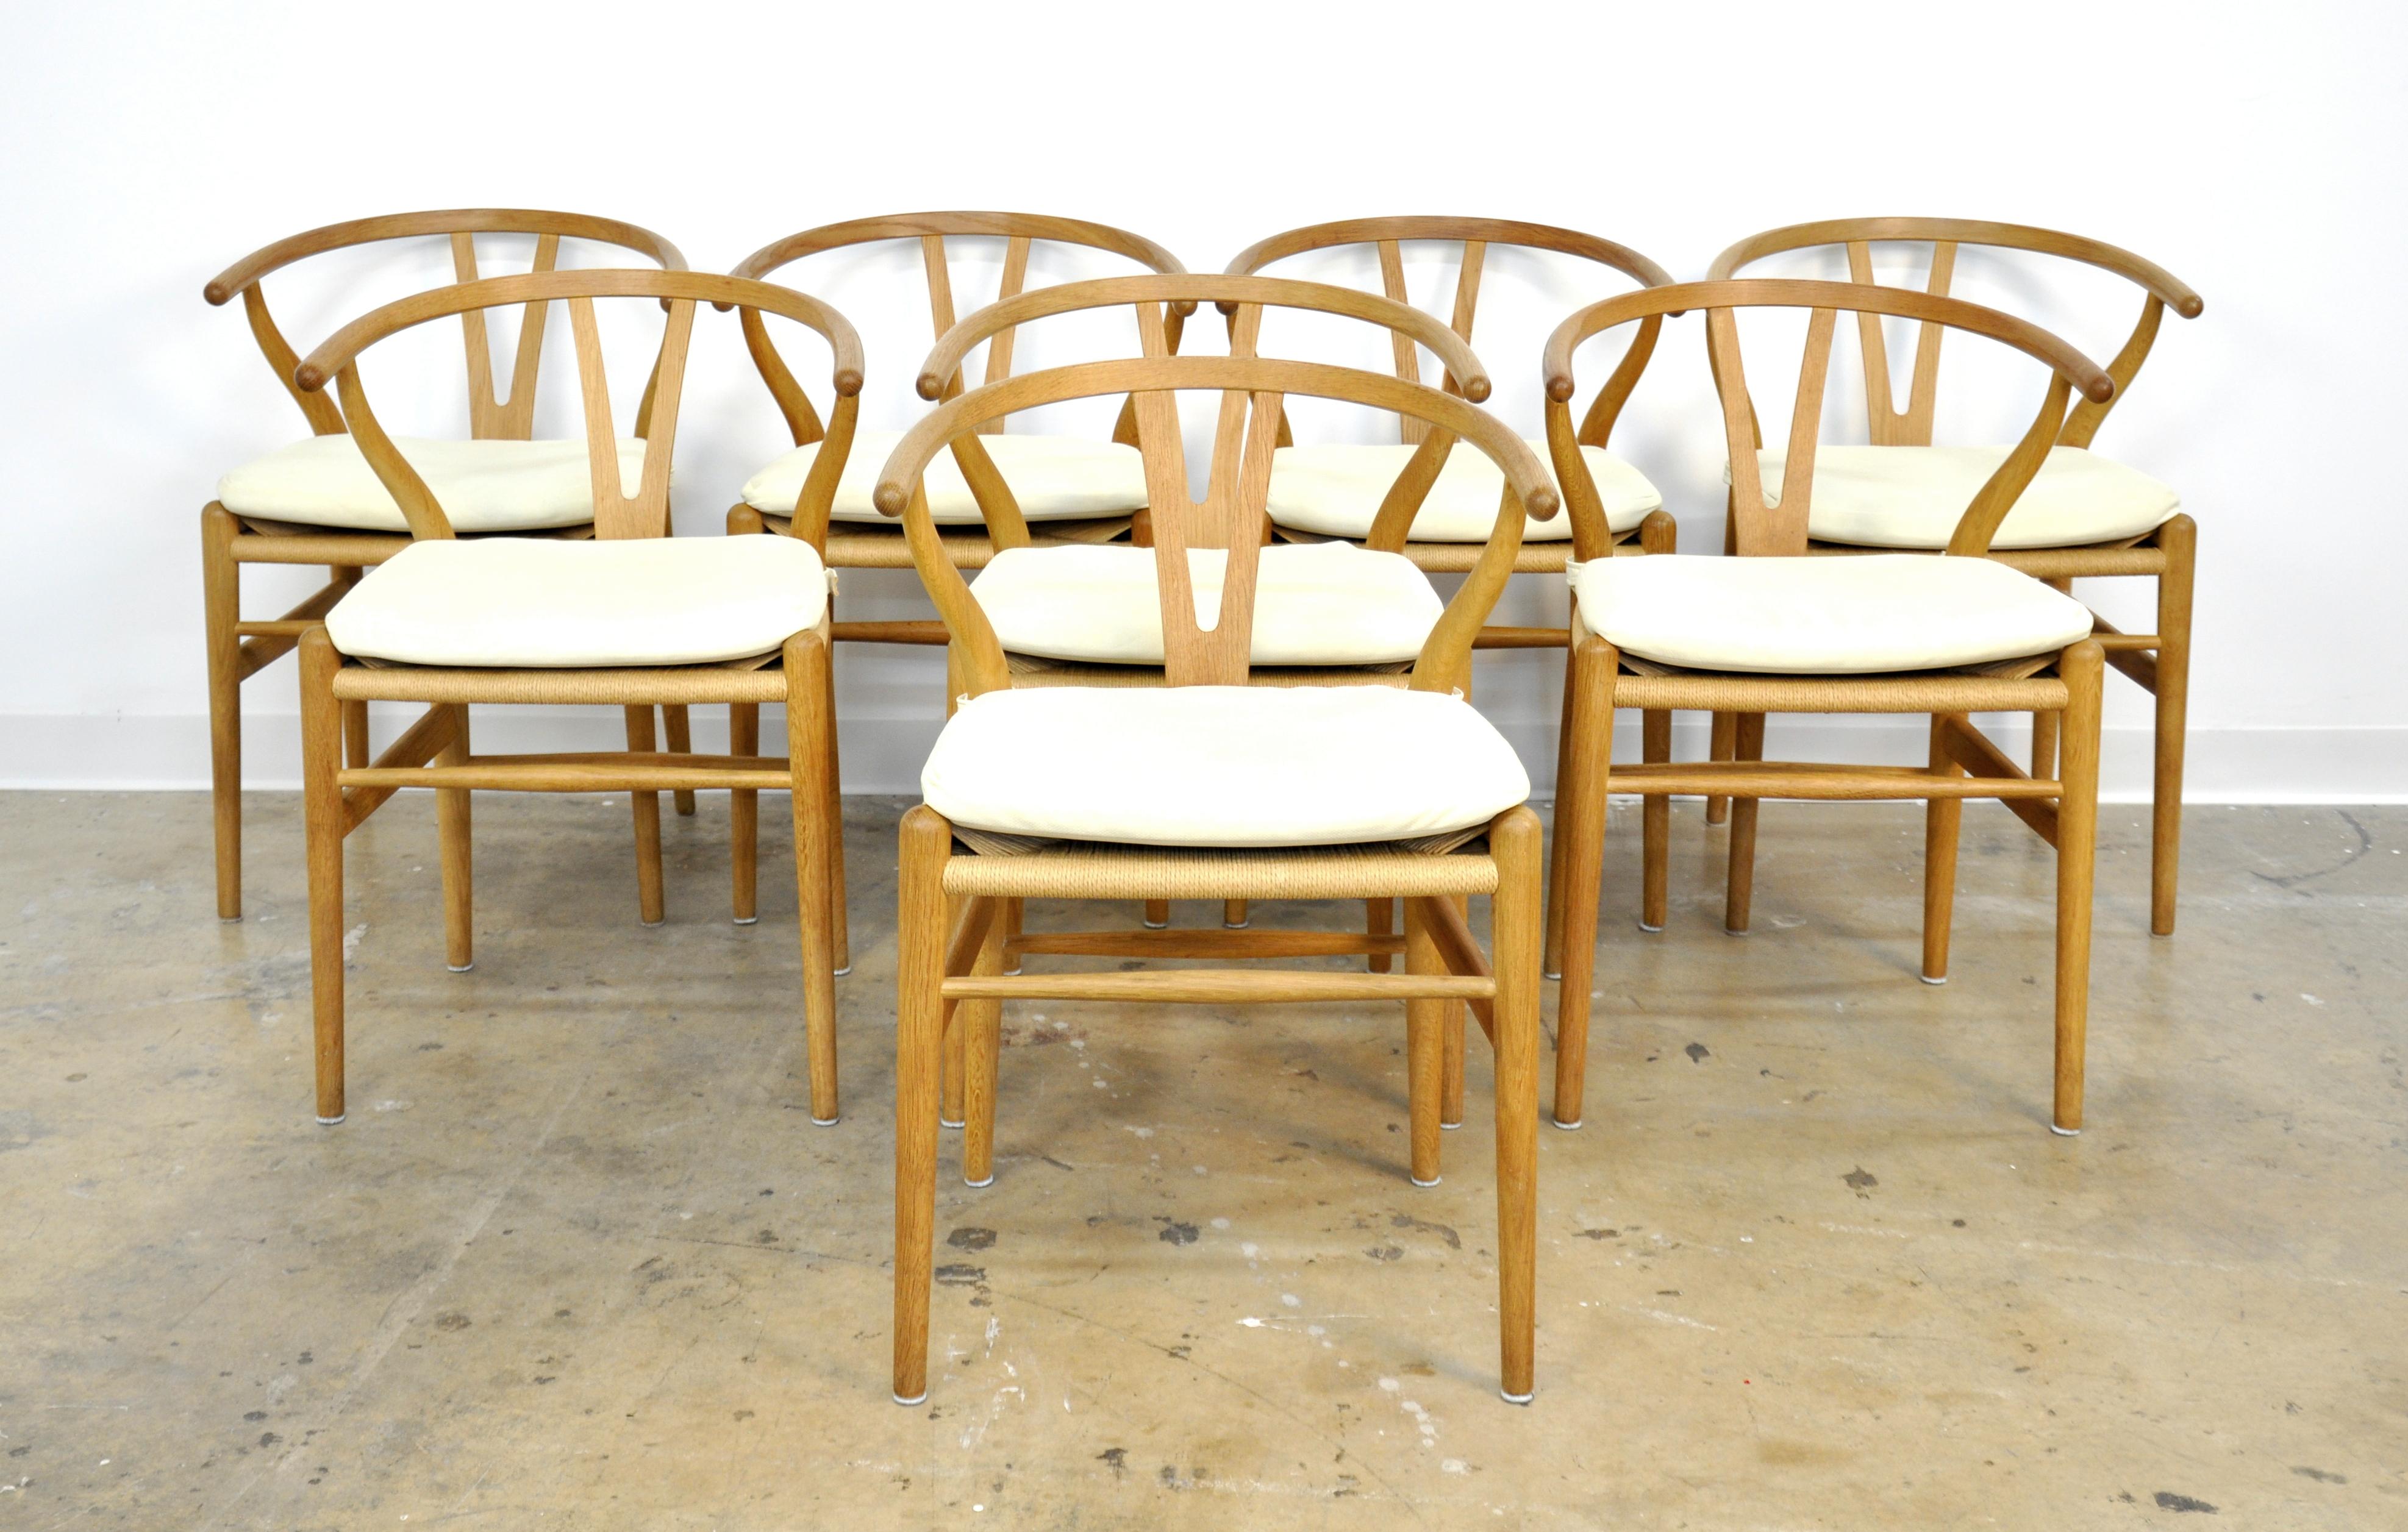 A set of eight vintage Mid-Century Modern CH24 dining chairs, also known as Y chair, designed by Hans Wegner in 1949, and in continuous production by Carl Hansen since 1950. The sculptural oak armchairs feature a steam-bent solid wood frame and a